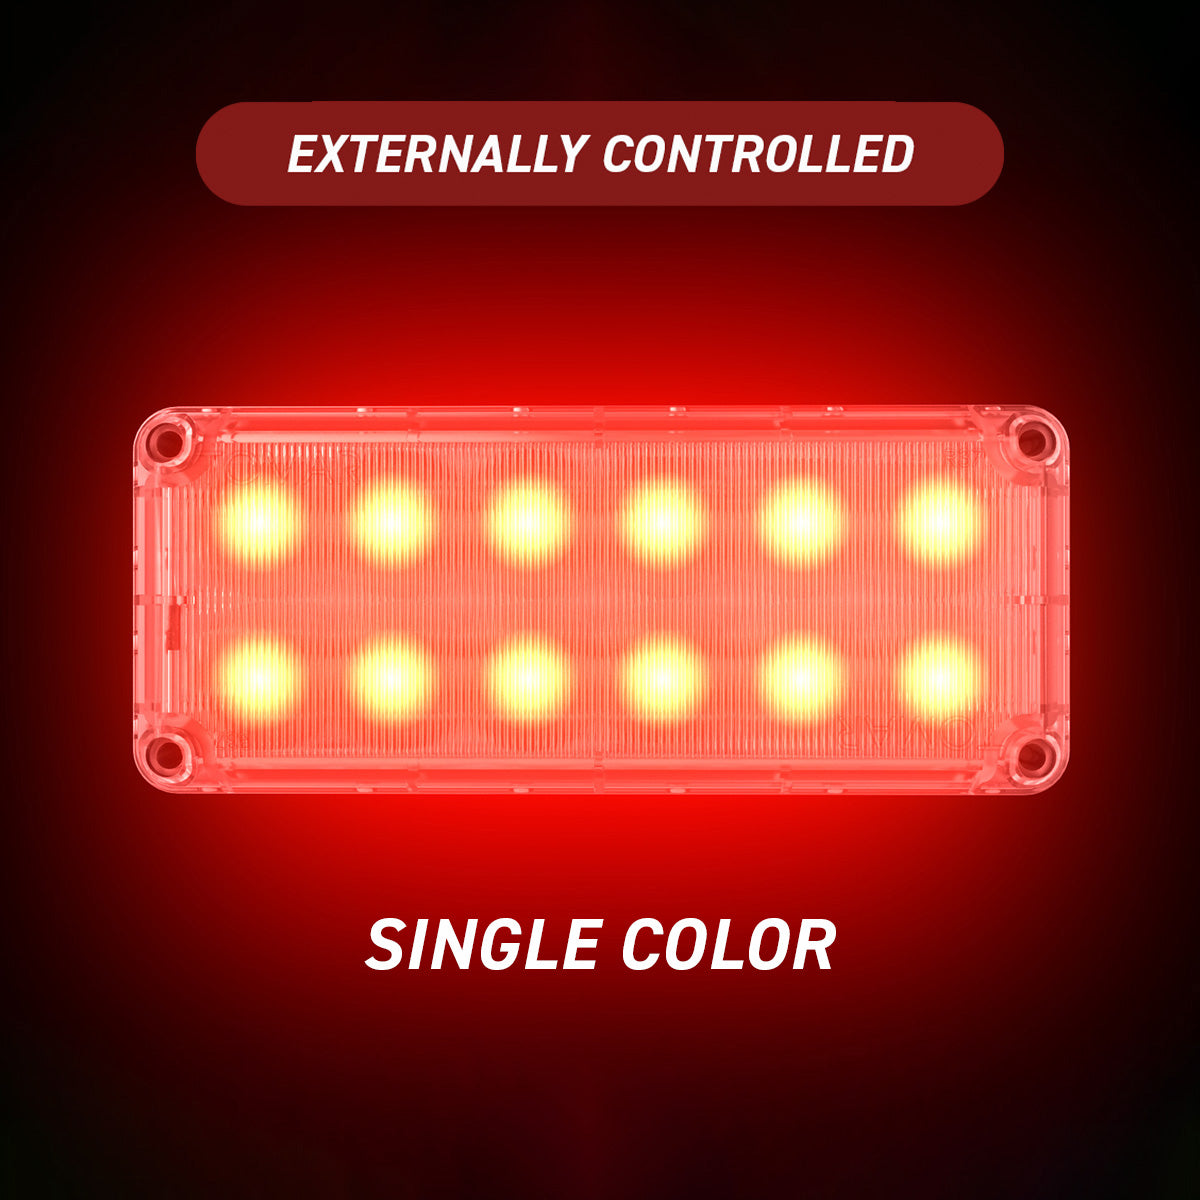 Revolution Series Single Color Externally Controlled